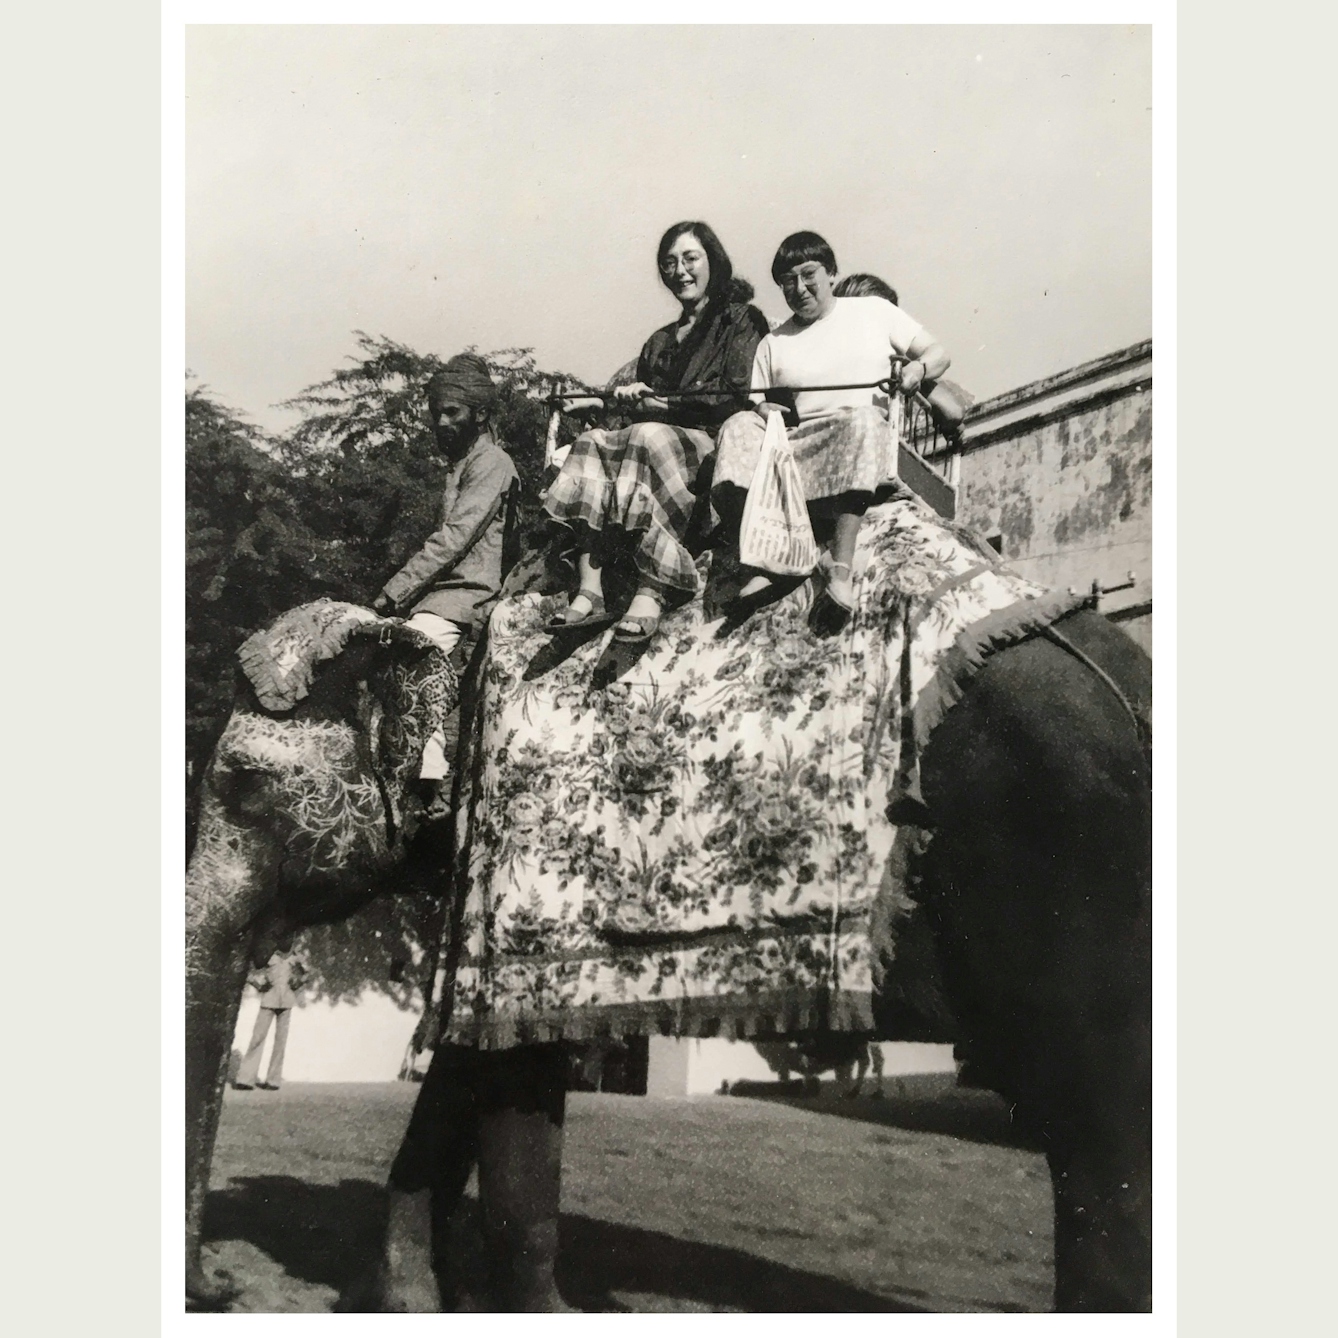 Black and white photograph showing 2 women sat on the back of an elephant, looking to camera. They are seated in a constructed seat which rests on a rug or blanket over the back of the elephant. Sitting on the elephant's neck is the 'driver'. He is also looking to camera.